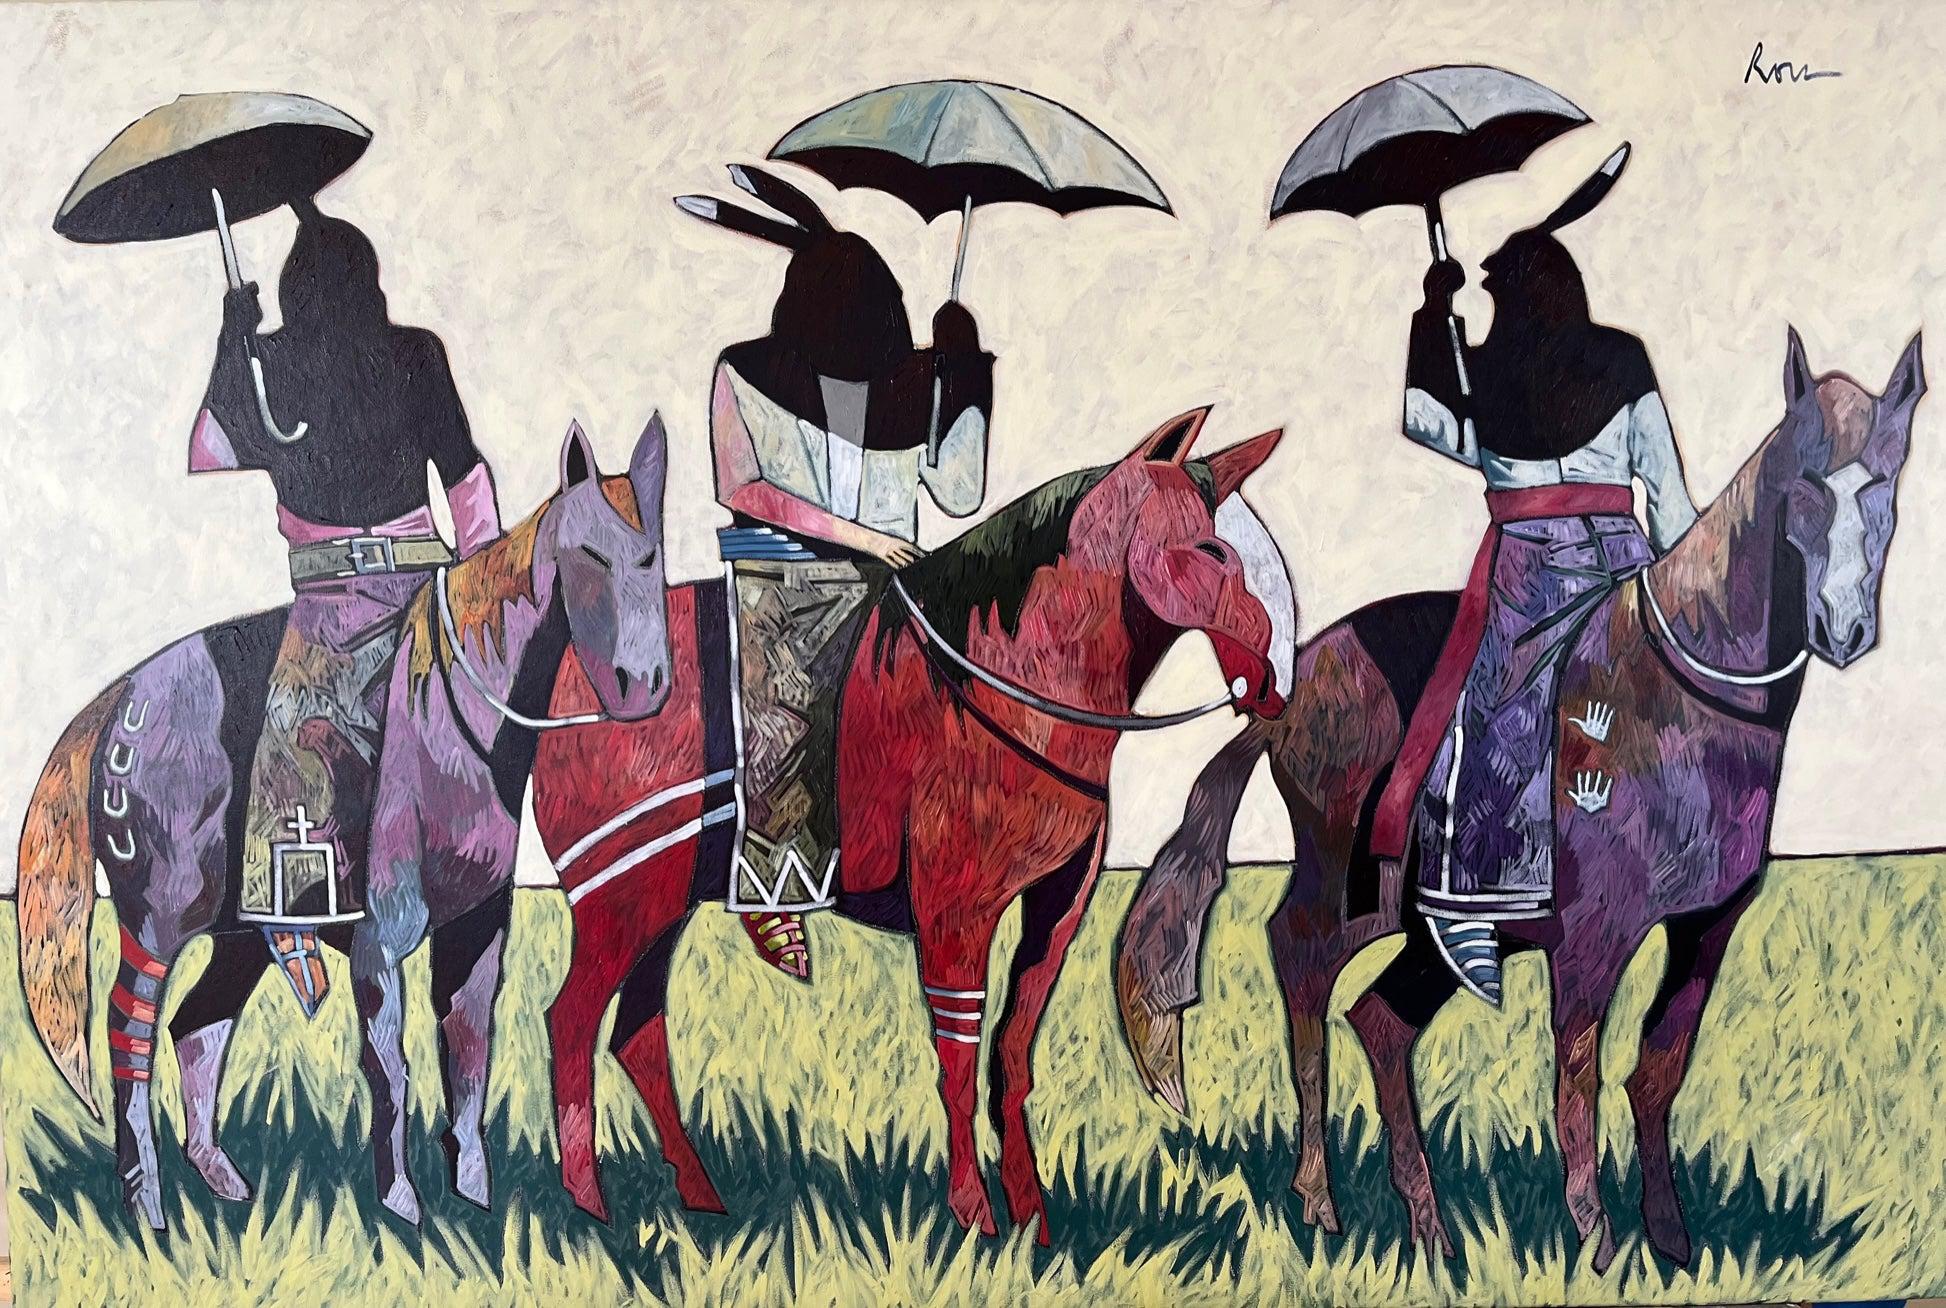 Indians with Umbrellas-Painting-Thom Ross-Sorrel Sky Gallery